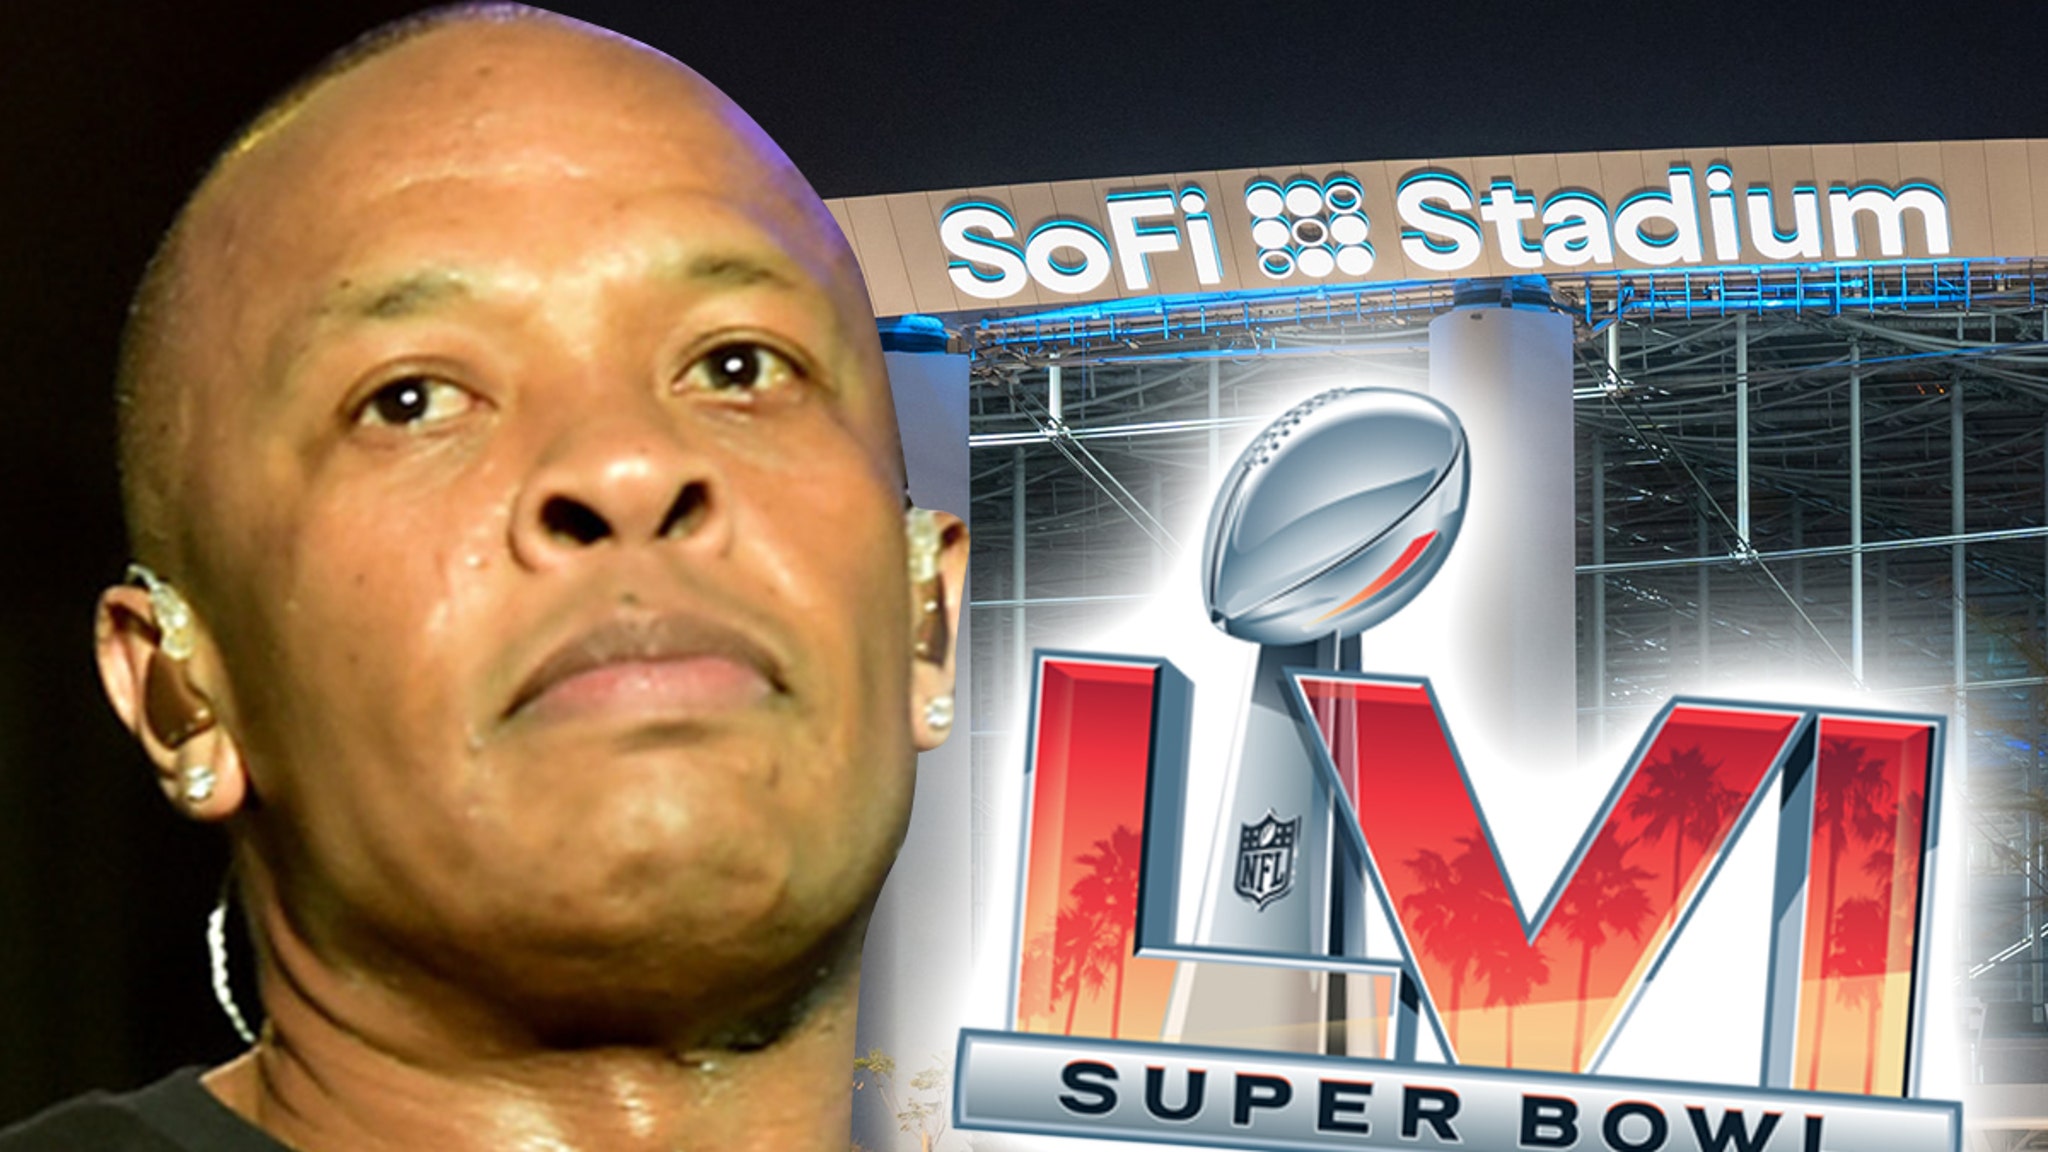 Dr. Dre On the Hook for Millions if COVID Kills Super Bowl Halftime Show – TMZ